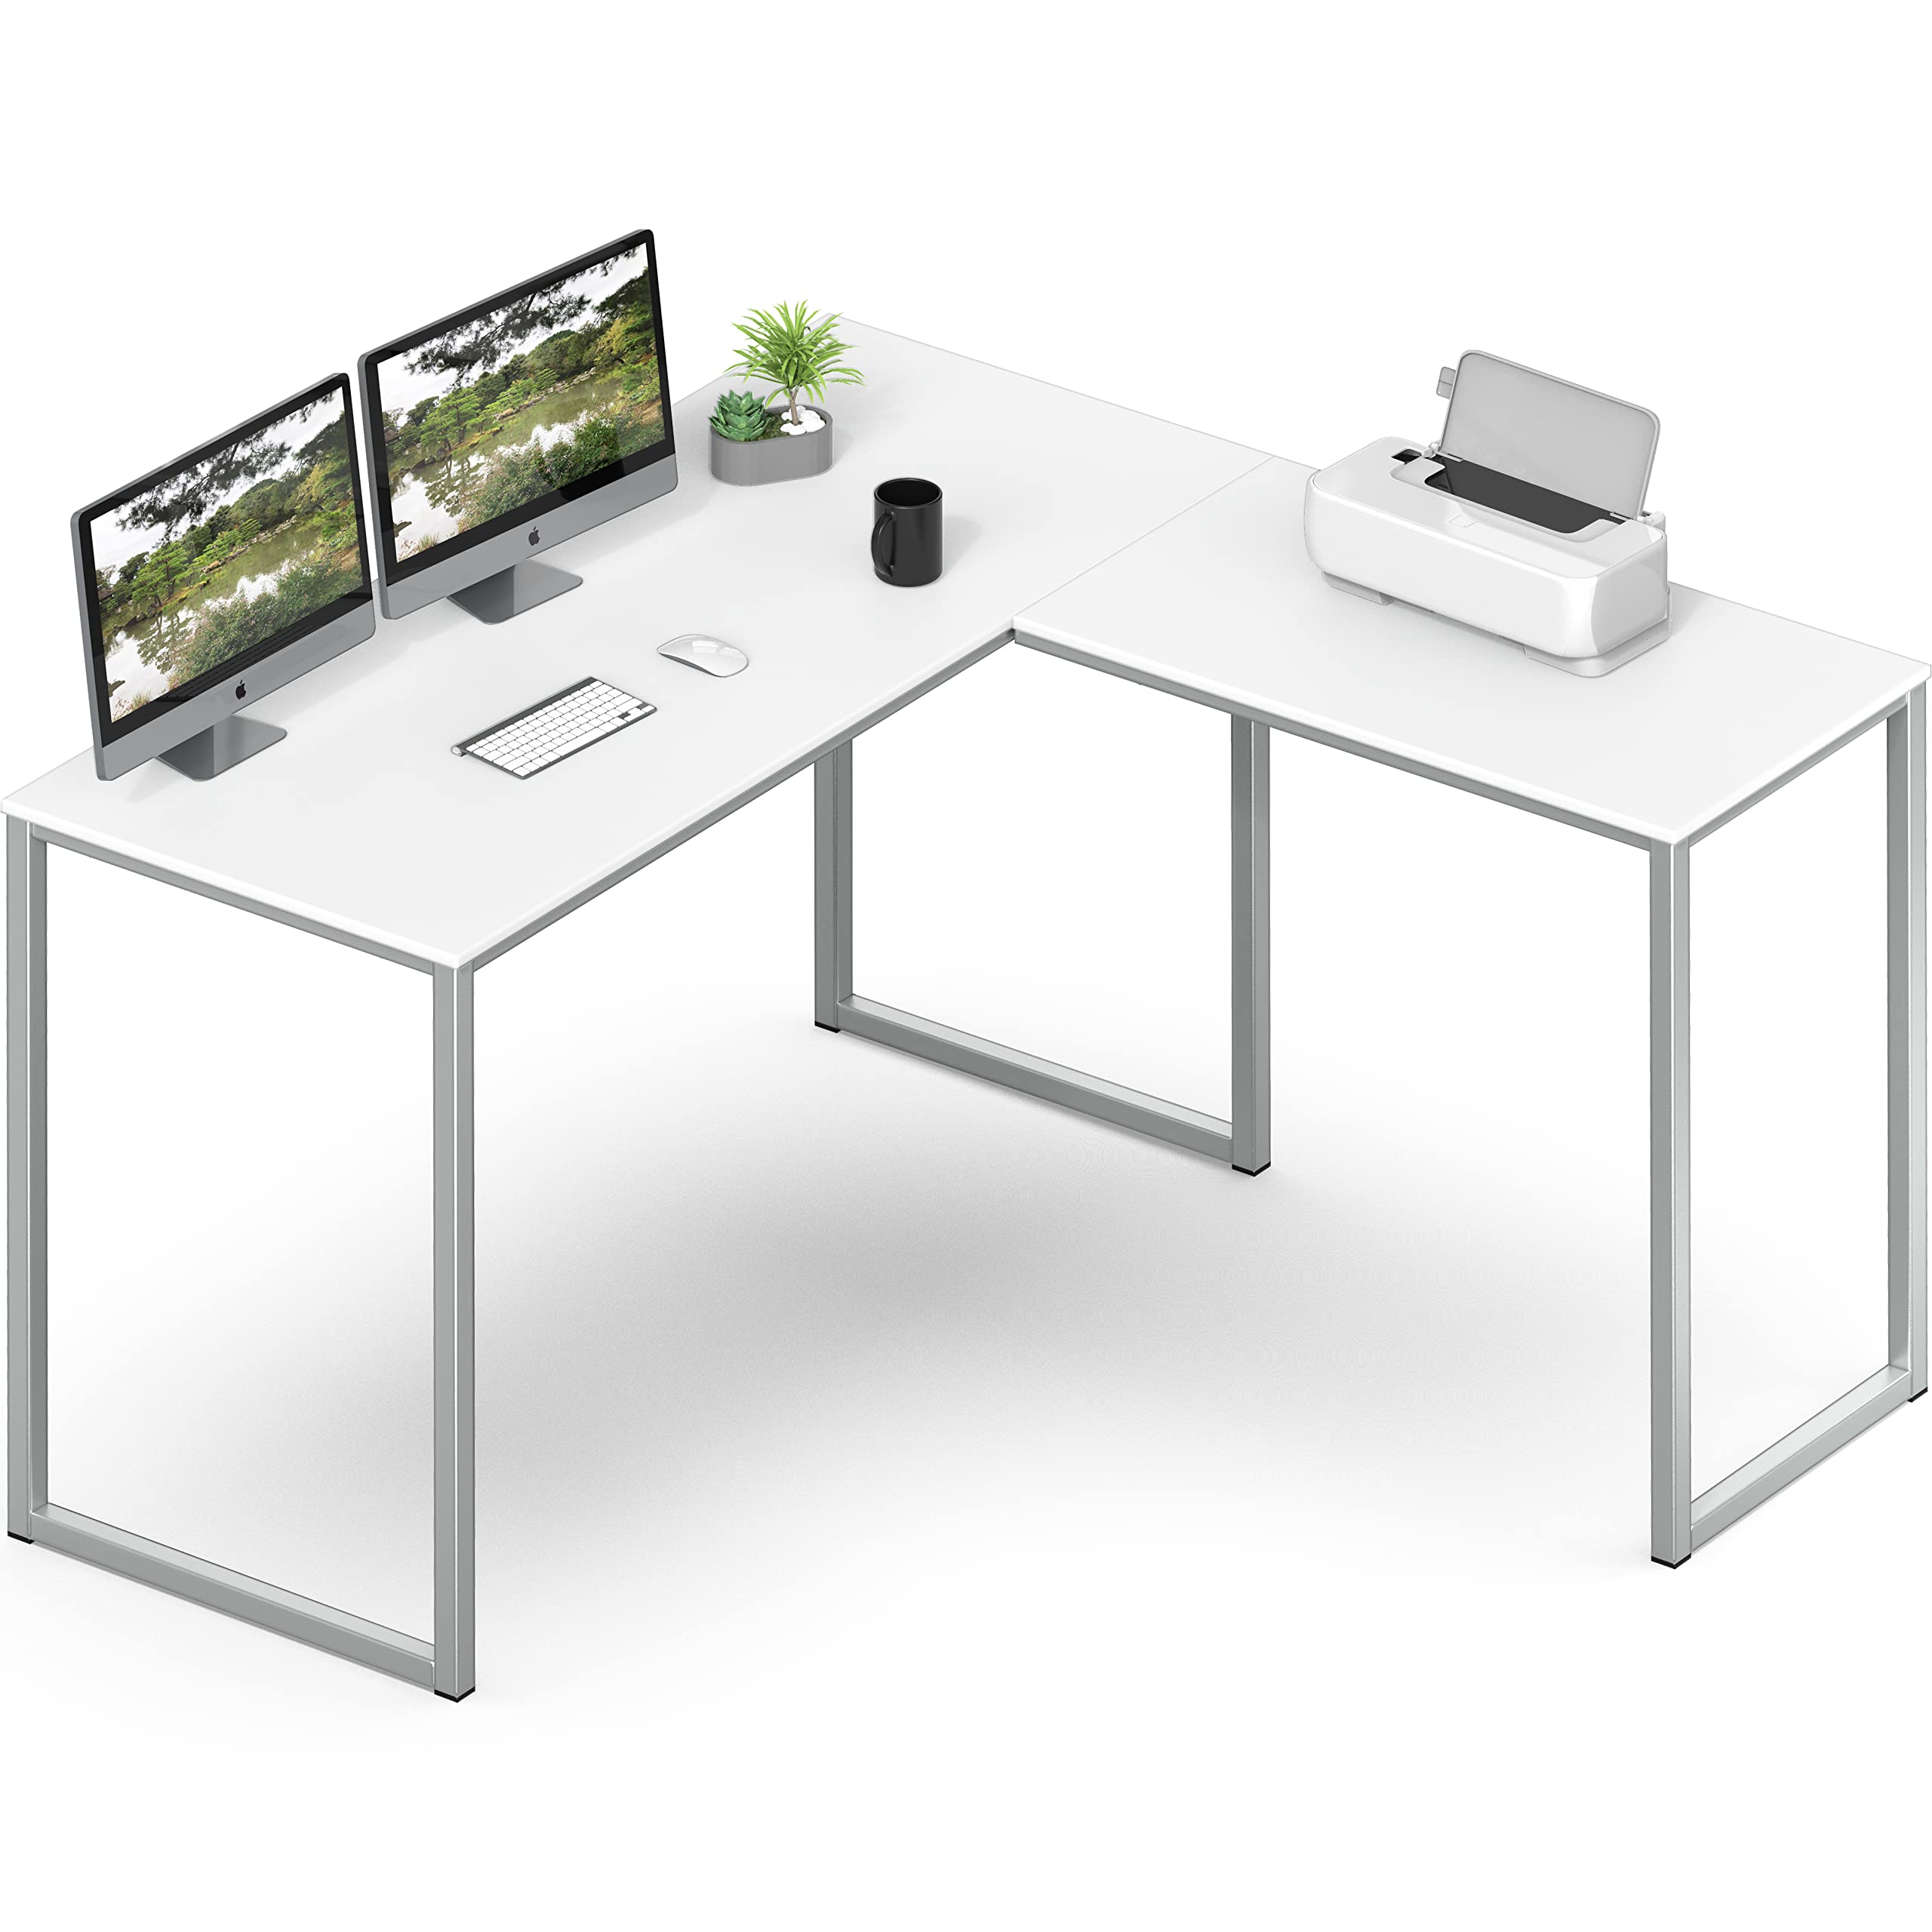 SHW 48-Inch Mission L-Shaped Home Computer desk, White - image 1 of 5